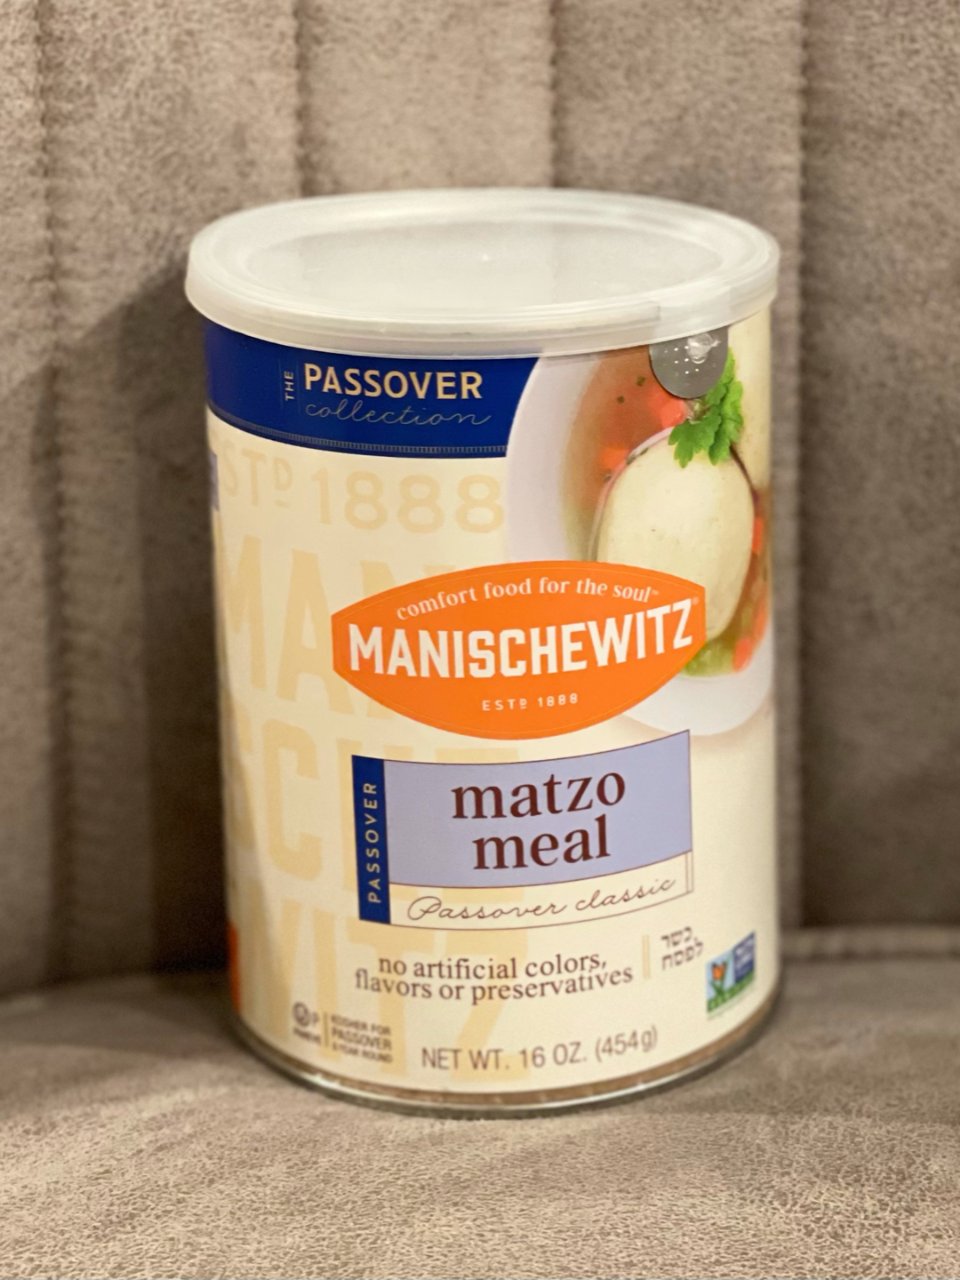 Manischewitz Matzo Meal, 16 oz Resealable Canister, (2 Pack - Total 2lbs) Kosher for Passover